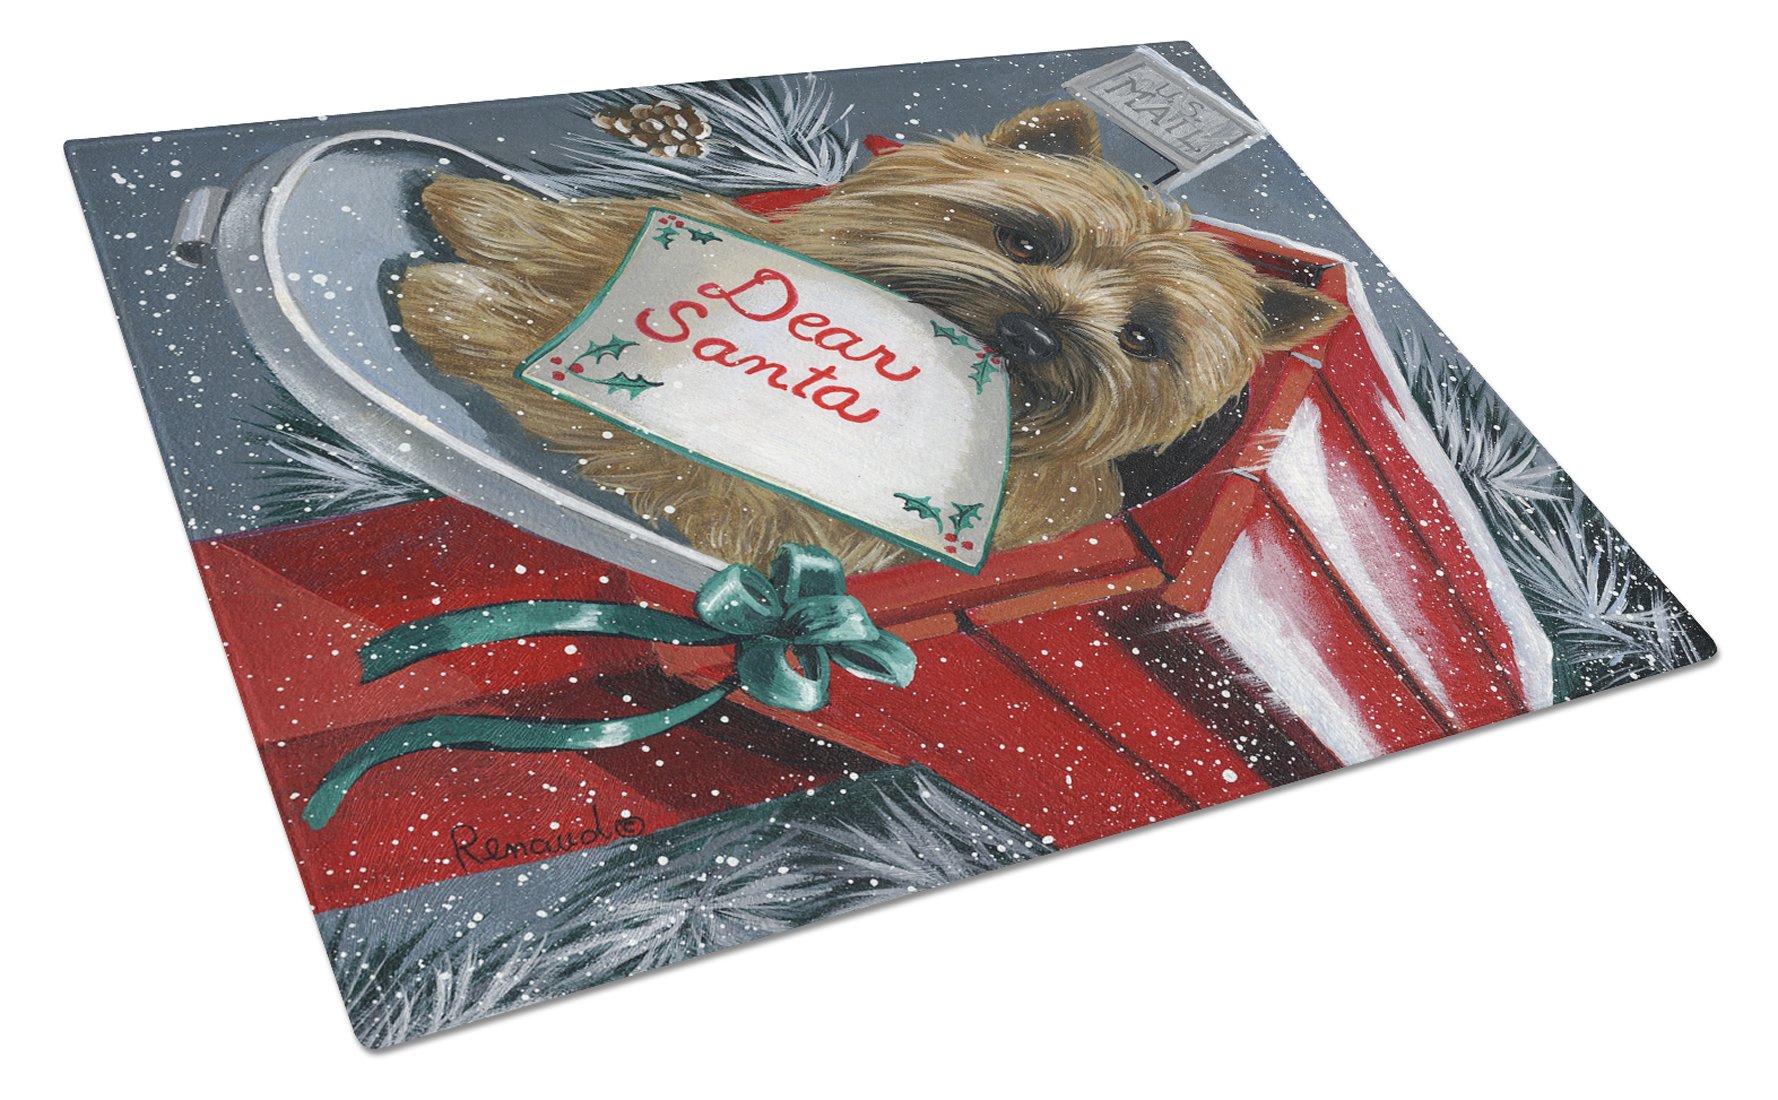 Cairn Terrier Christmas Letter to Santa Glass Cutting Board Large PPP3054LCB by Caroline's Treasures